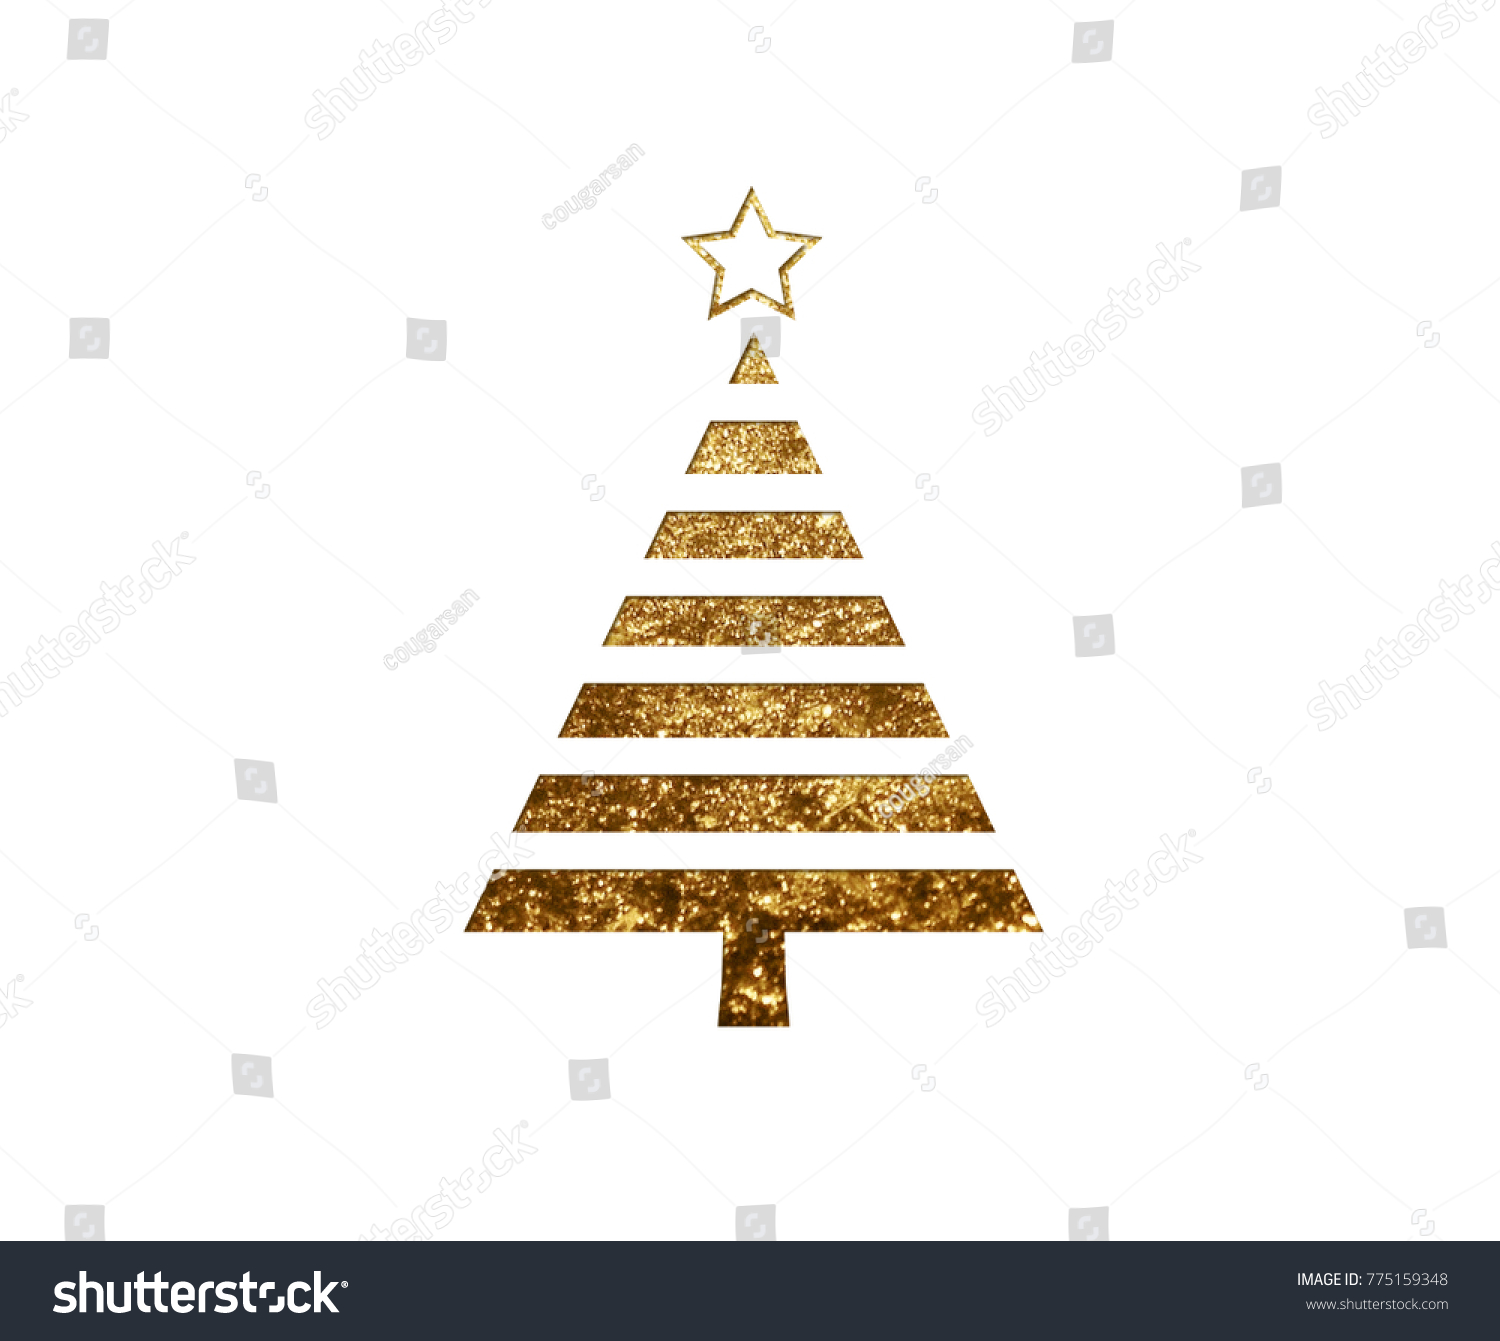 The isolated golden glitter Christmas tree flat icon on black background #775159348